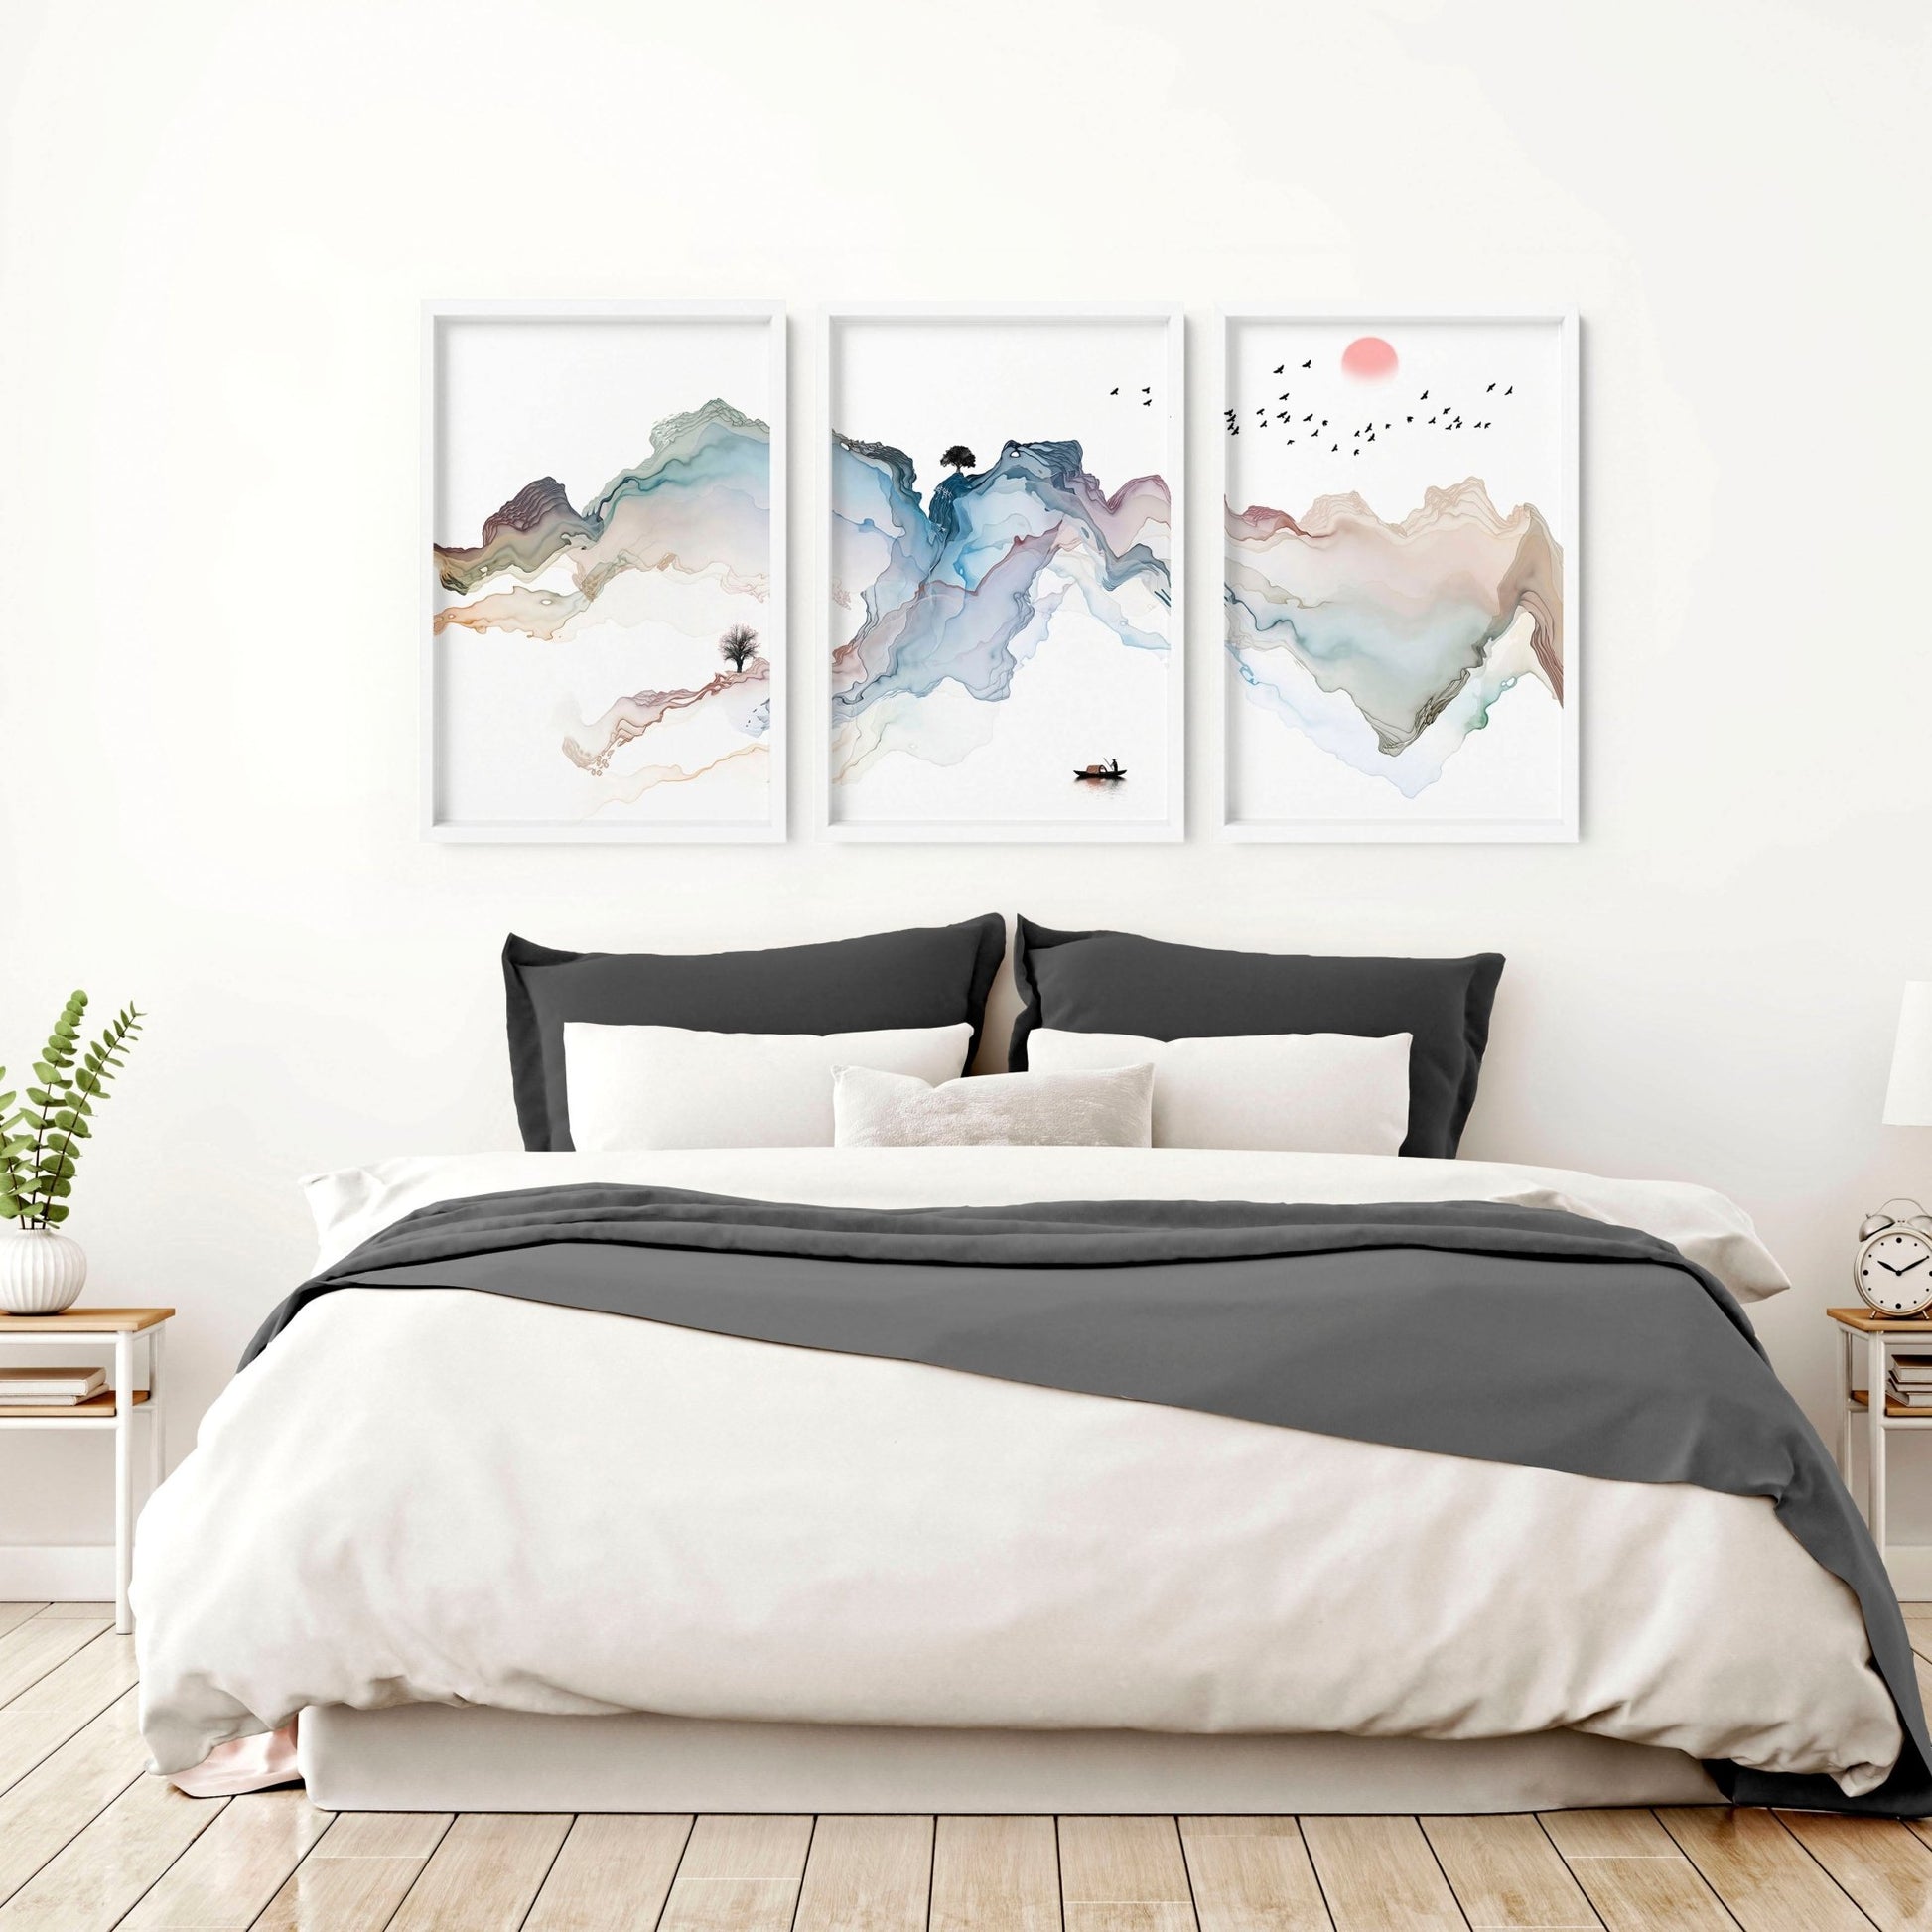 Japanese bedroom decor | set of 3 wall art prints - About Wall Art